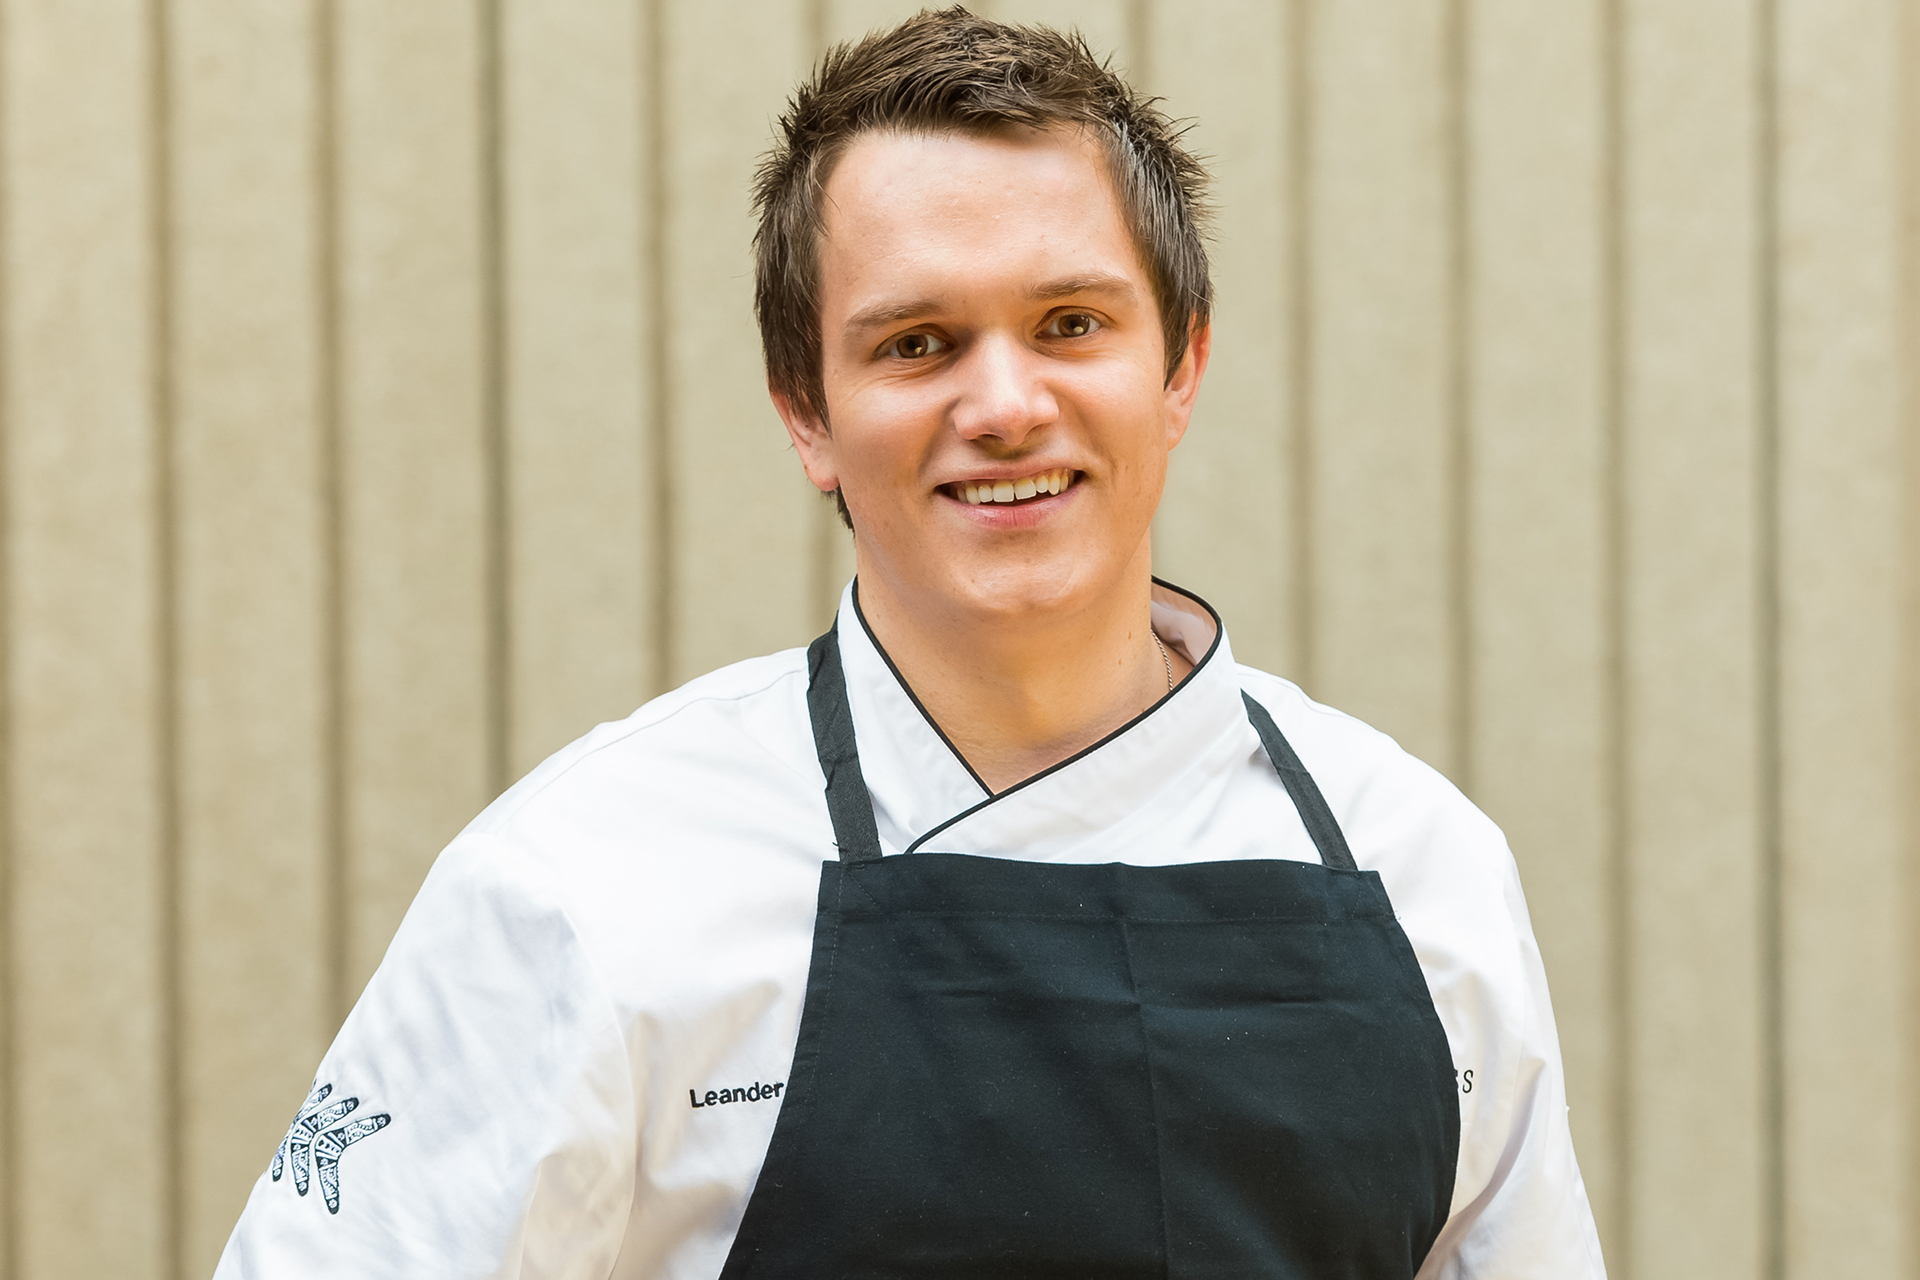 Our latest feature chef for Flair magazine, Leo Gstrein